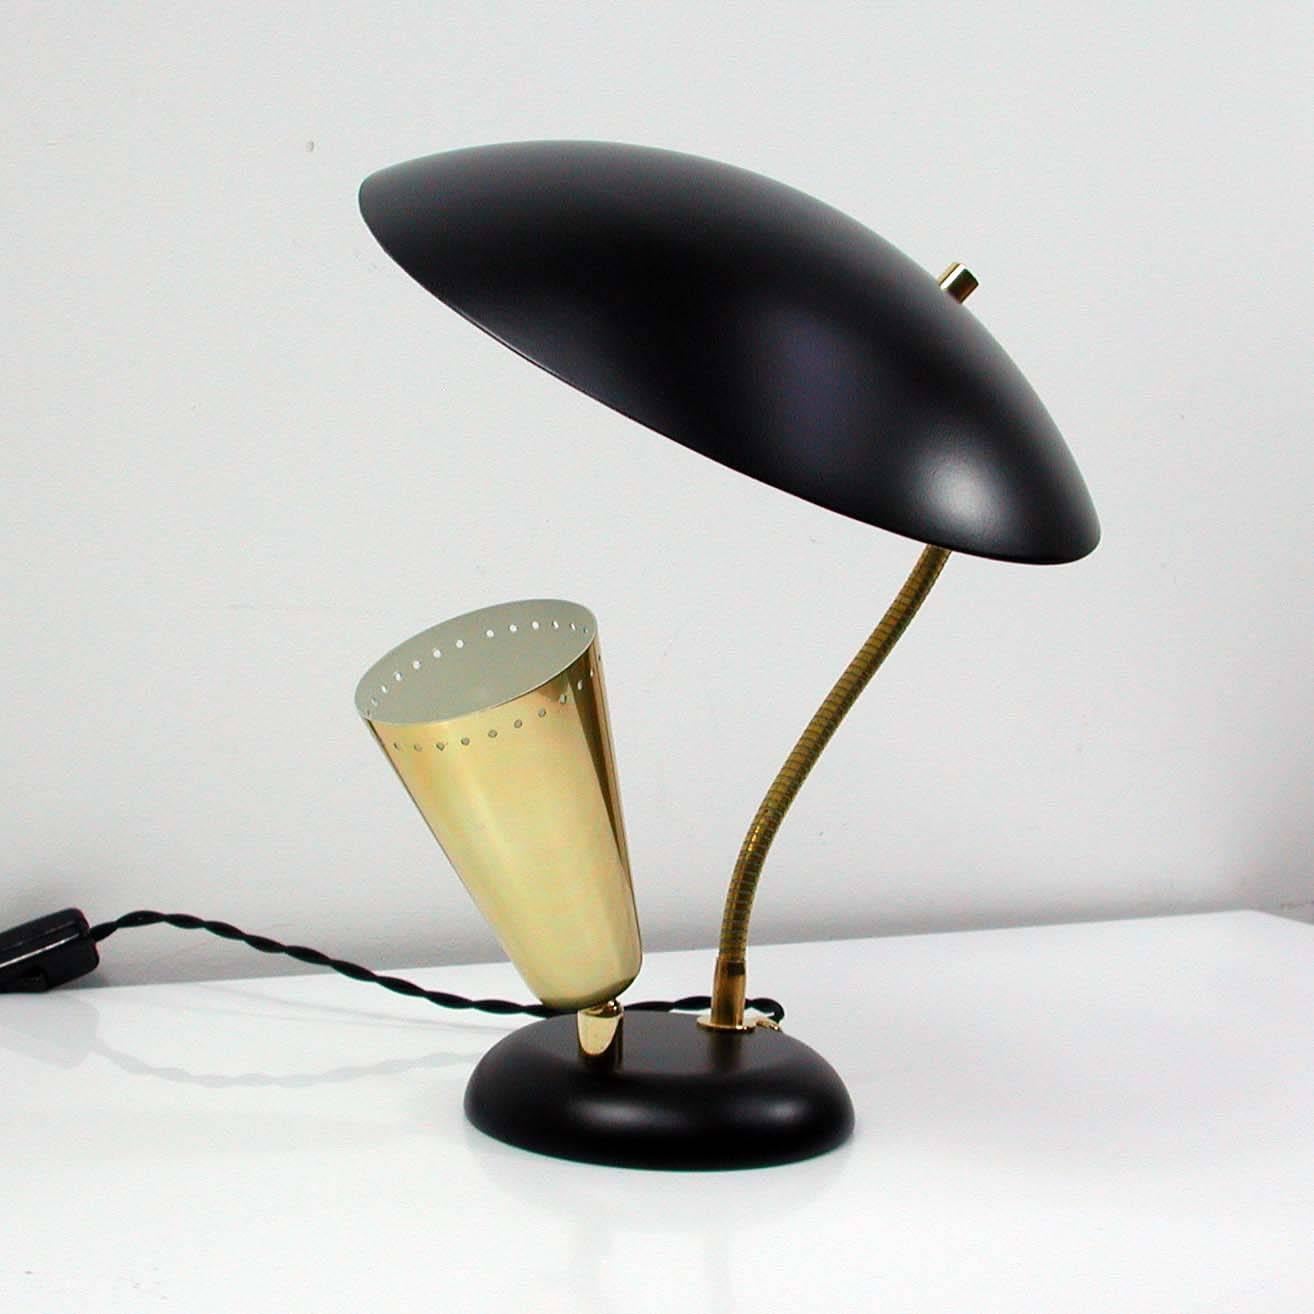 Awesome 1950s Italian Mid-Century table lamp in the manner of Stilnovo. With upright brass plated lamp shade and gooseneck reflecting lamp shade. Metal pieces are black lacquered. Both lamp shades are adjustable.
Excellent vintage condition. Rewired.